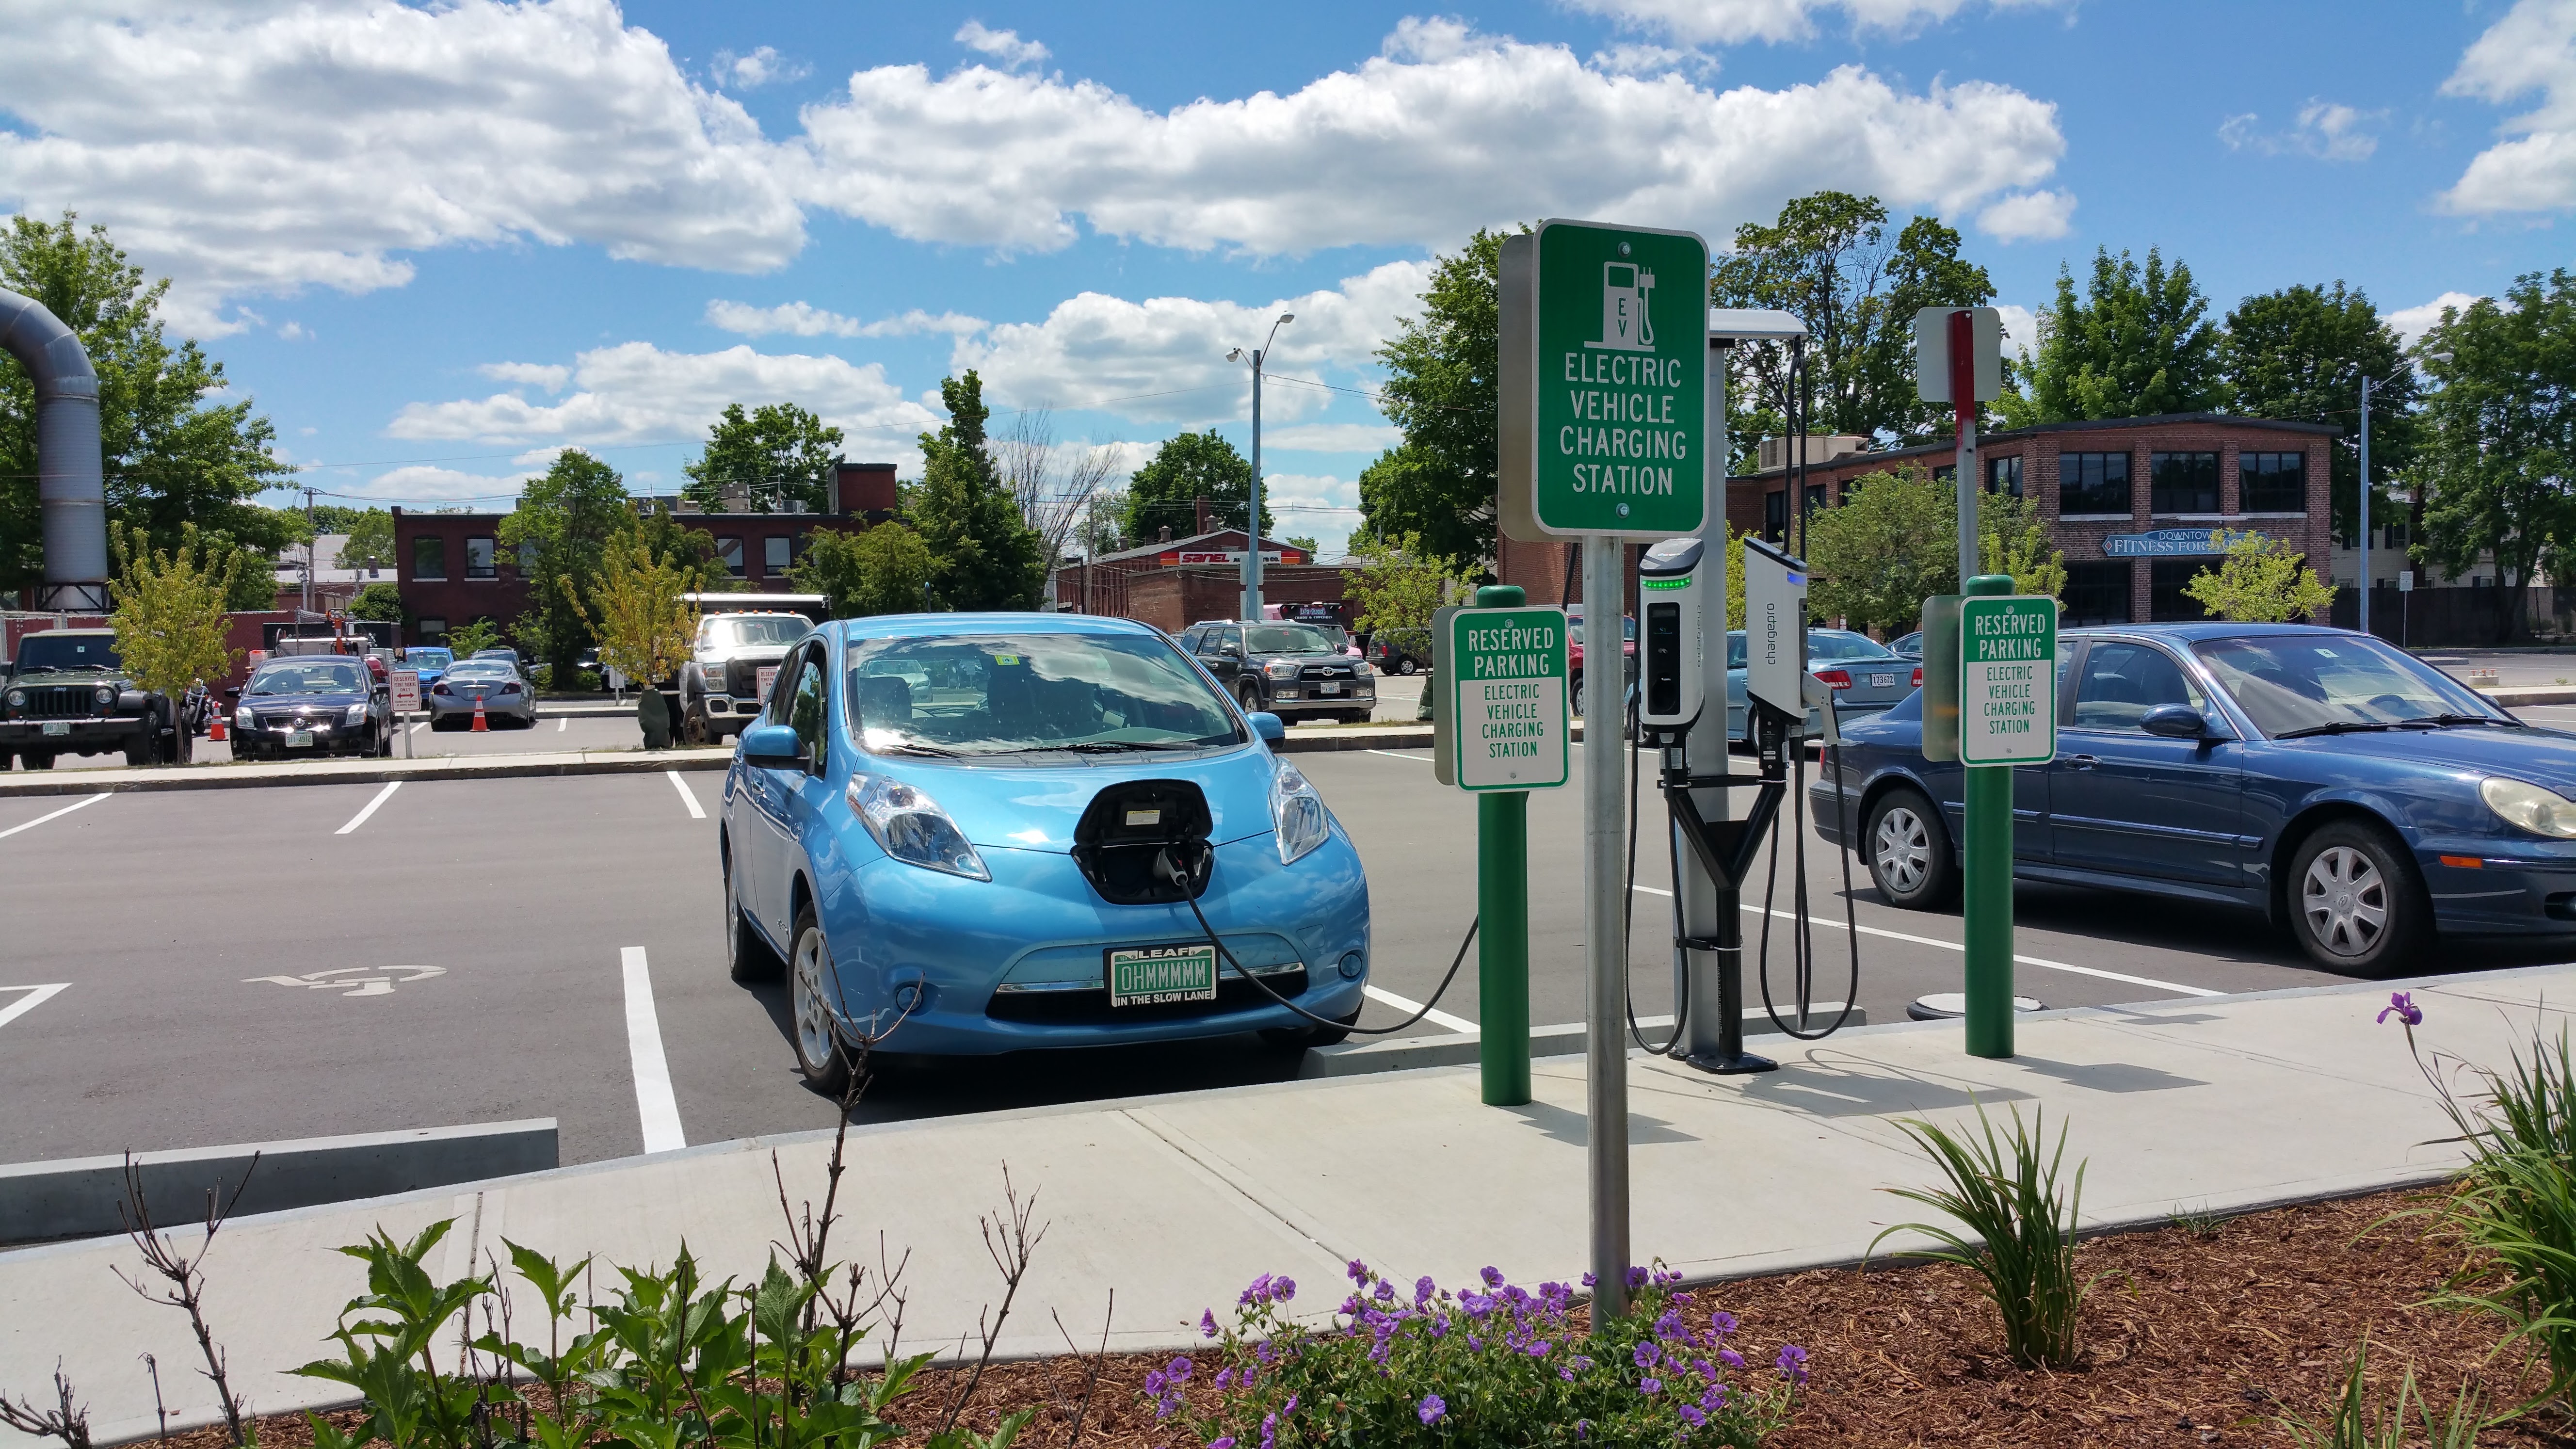 Electric vehicle at Commercial Street parking lot in Keene